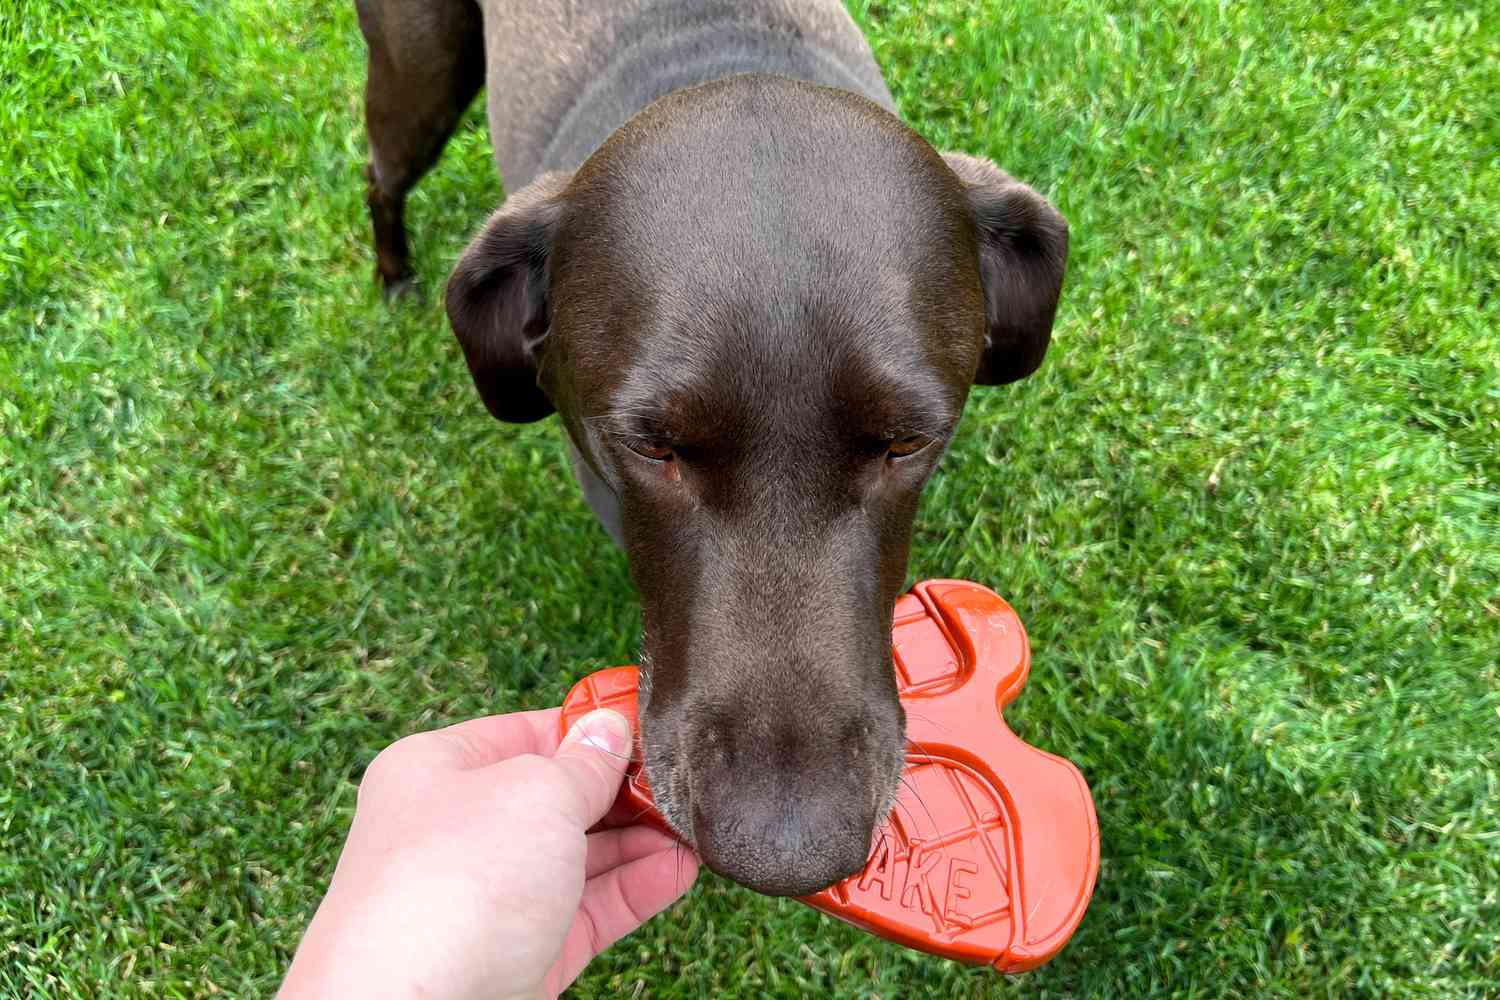 Dog taking Bullymake Steak Dog Toy from person